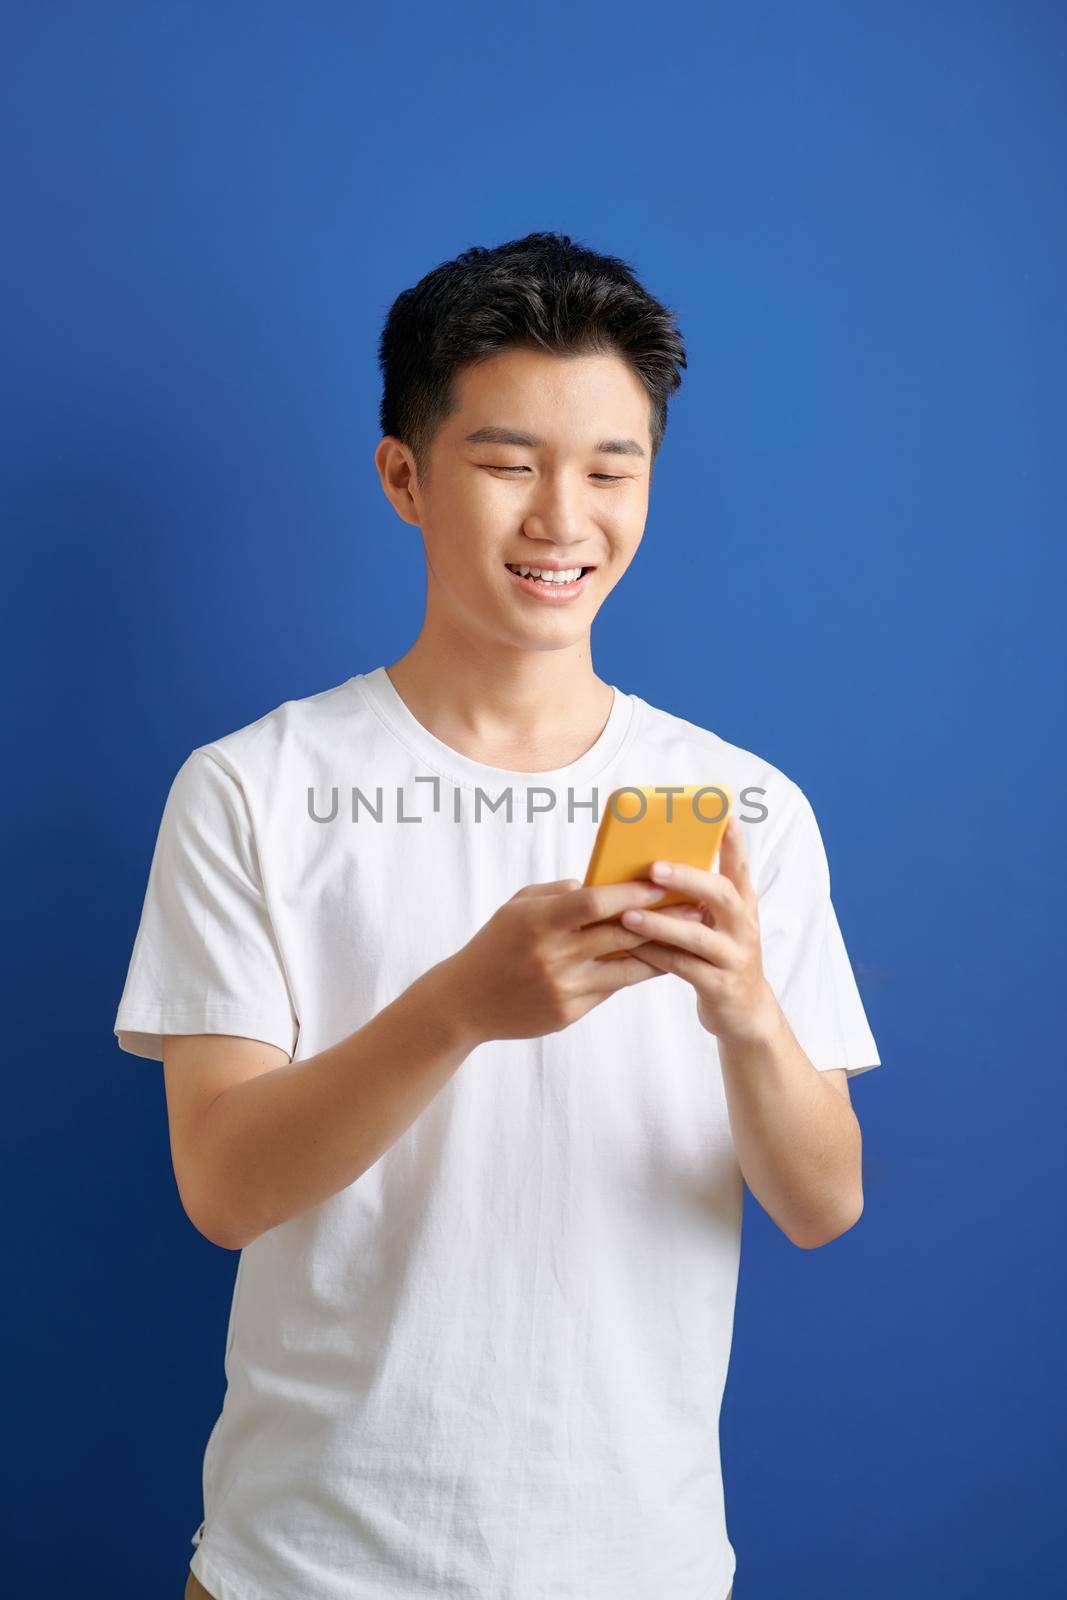 Smiling young good looking Asian man using smartphone to get in touch with family and friends isolated on blue  background